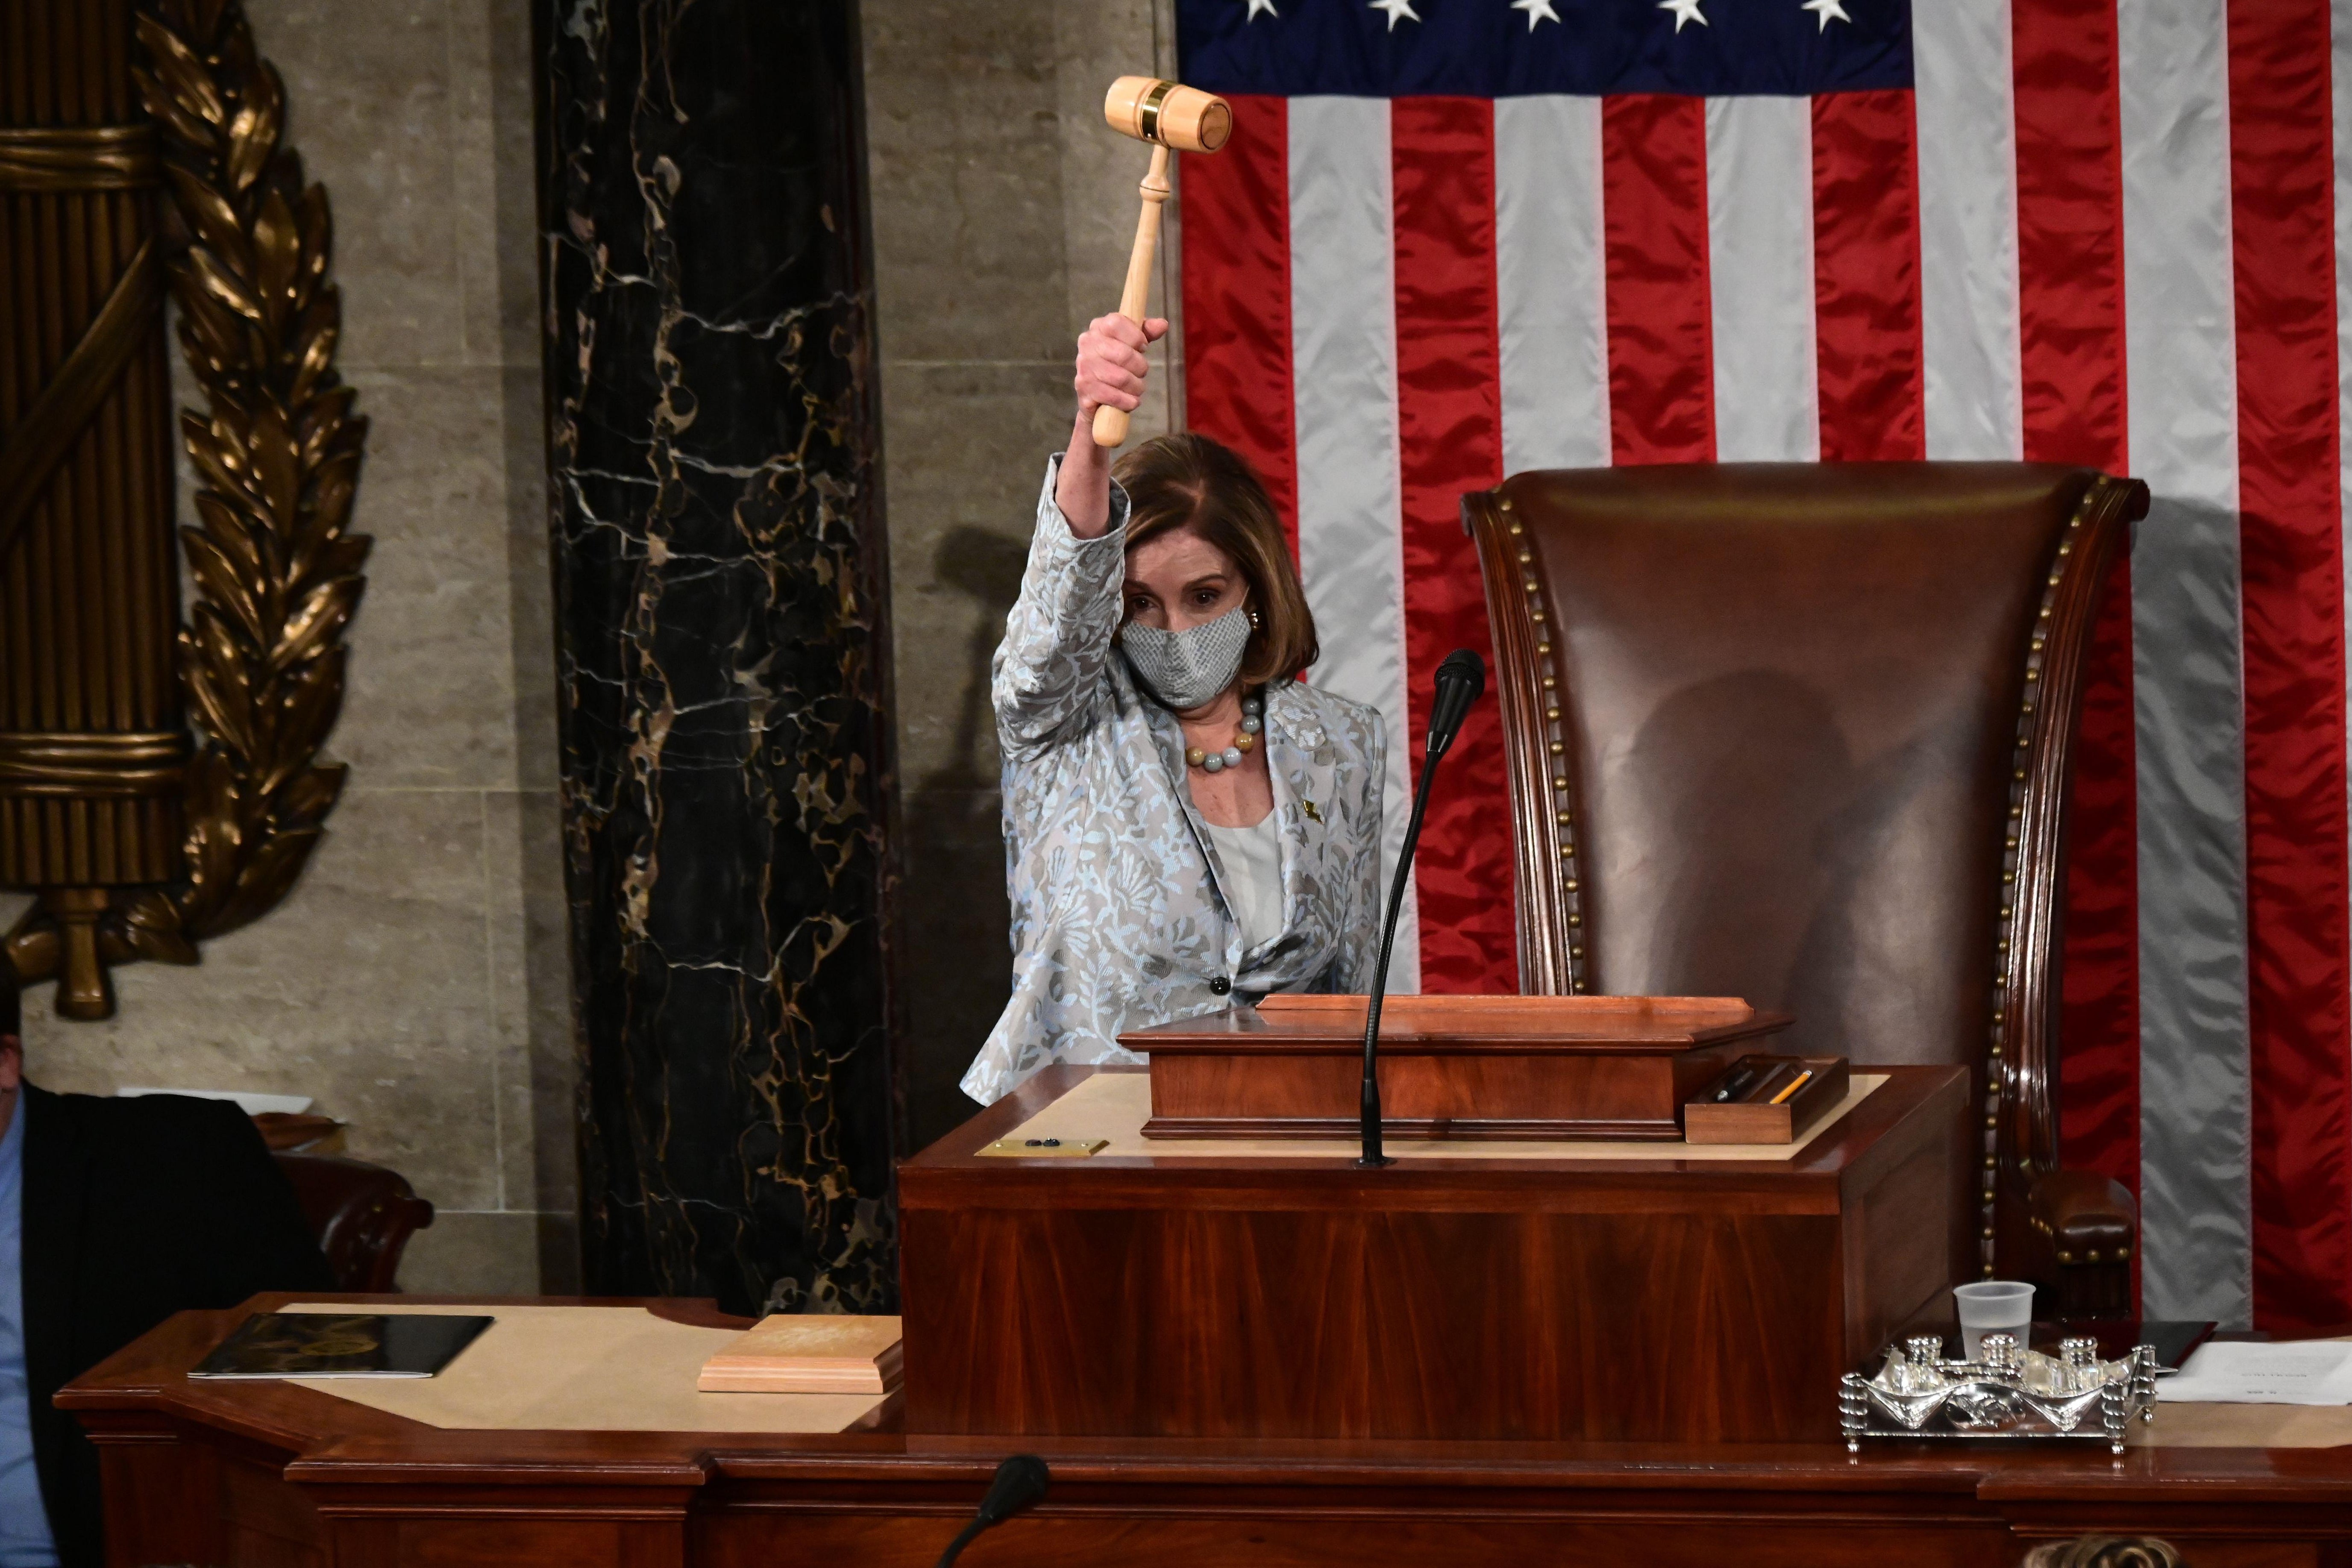 Speaker of the House Nancy Pelosi wields the Speaker's gavel after being re-elected as Speaker and preparing to swear in members of the 117th House of Representatives in Washington, D.C. on January 3, 2021. 